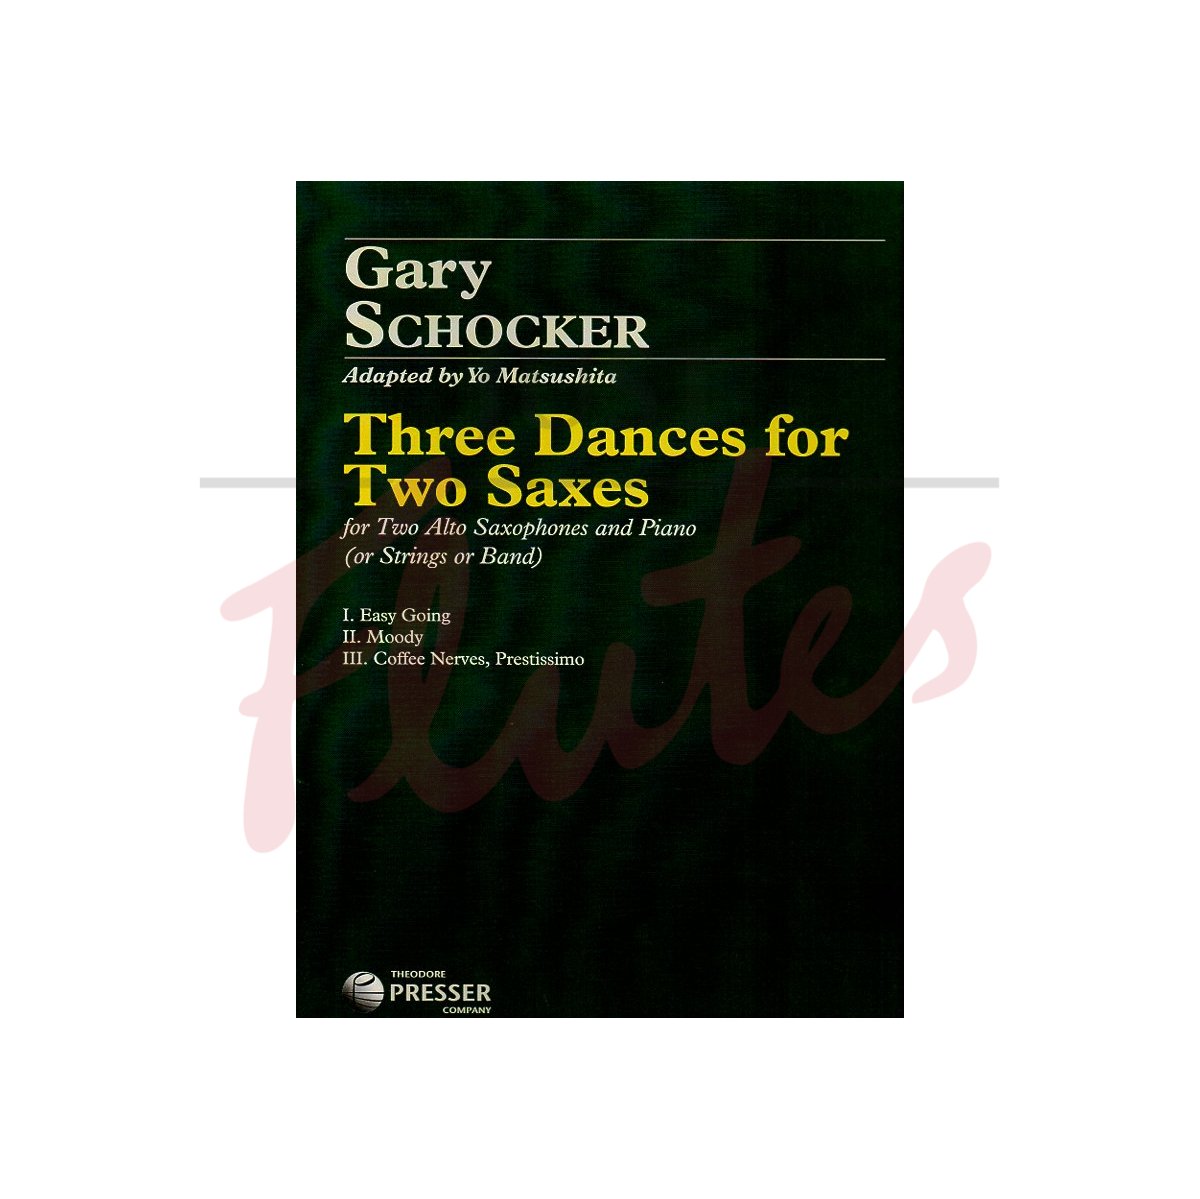 Three Dances for Two Saxes